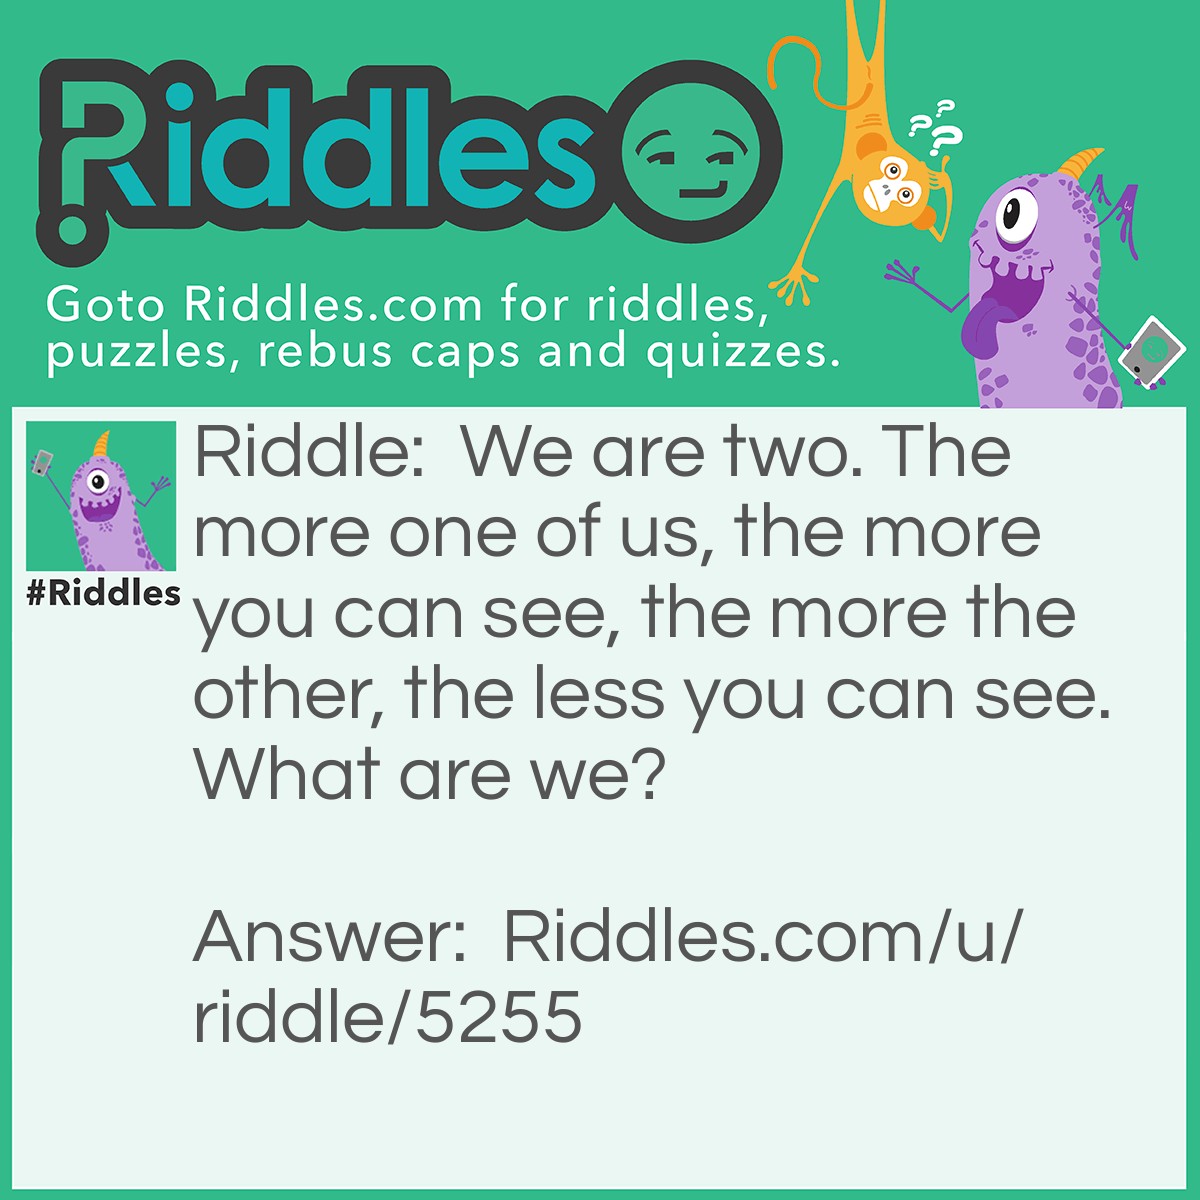 Riddle: We are two. The more one of us, the more you can see, the more the other, the less you can see. What are we? Answer: Light and Darkness.